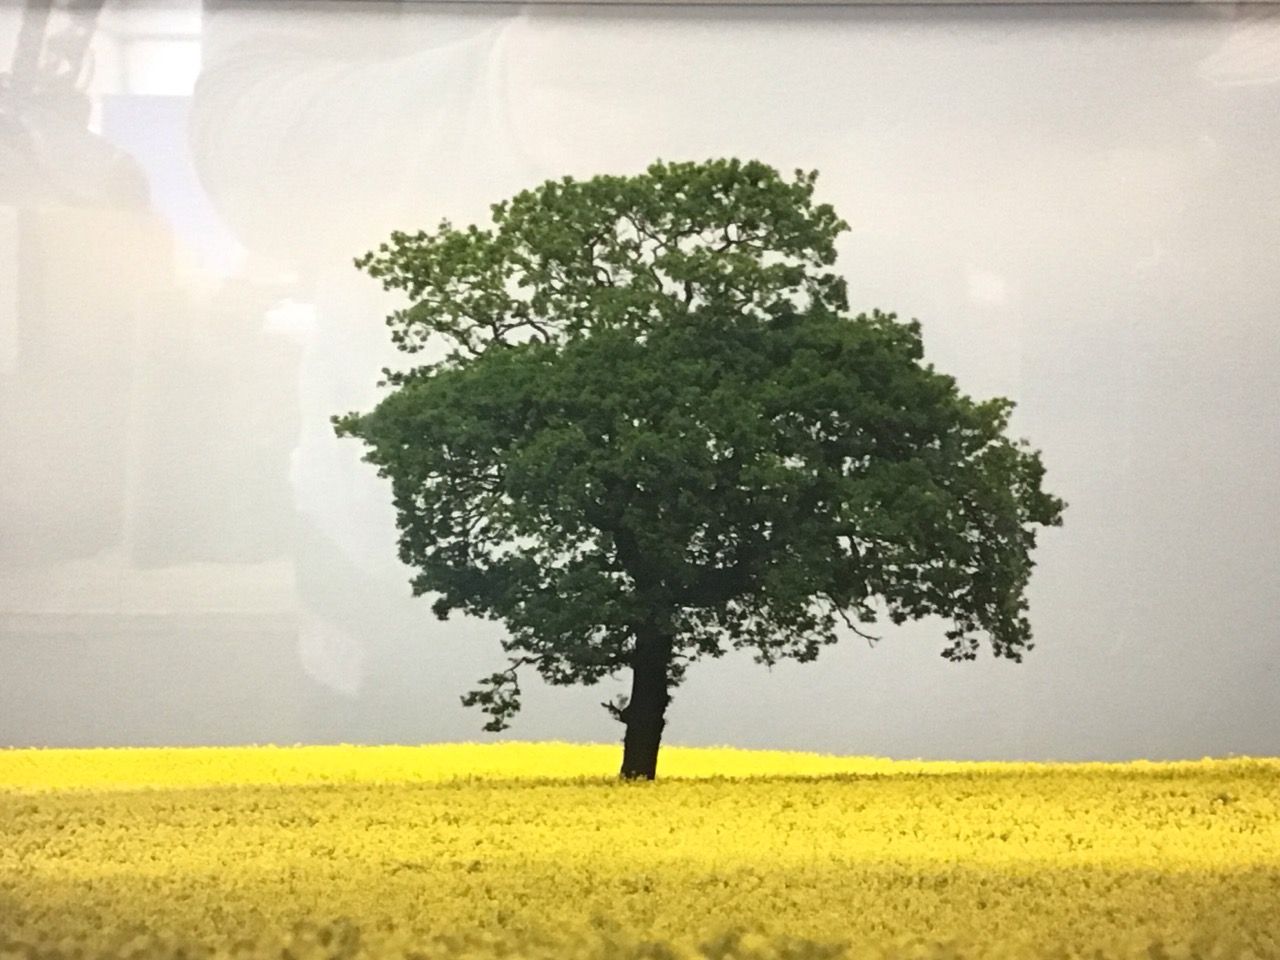 John Williamson, photographic prints - landscape with tree in a rape field and landscape with - Image 3 of 3